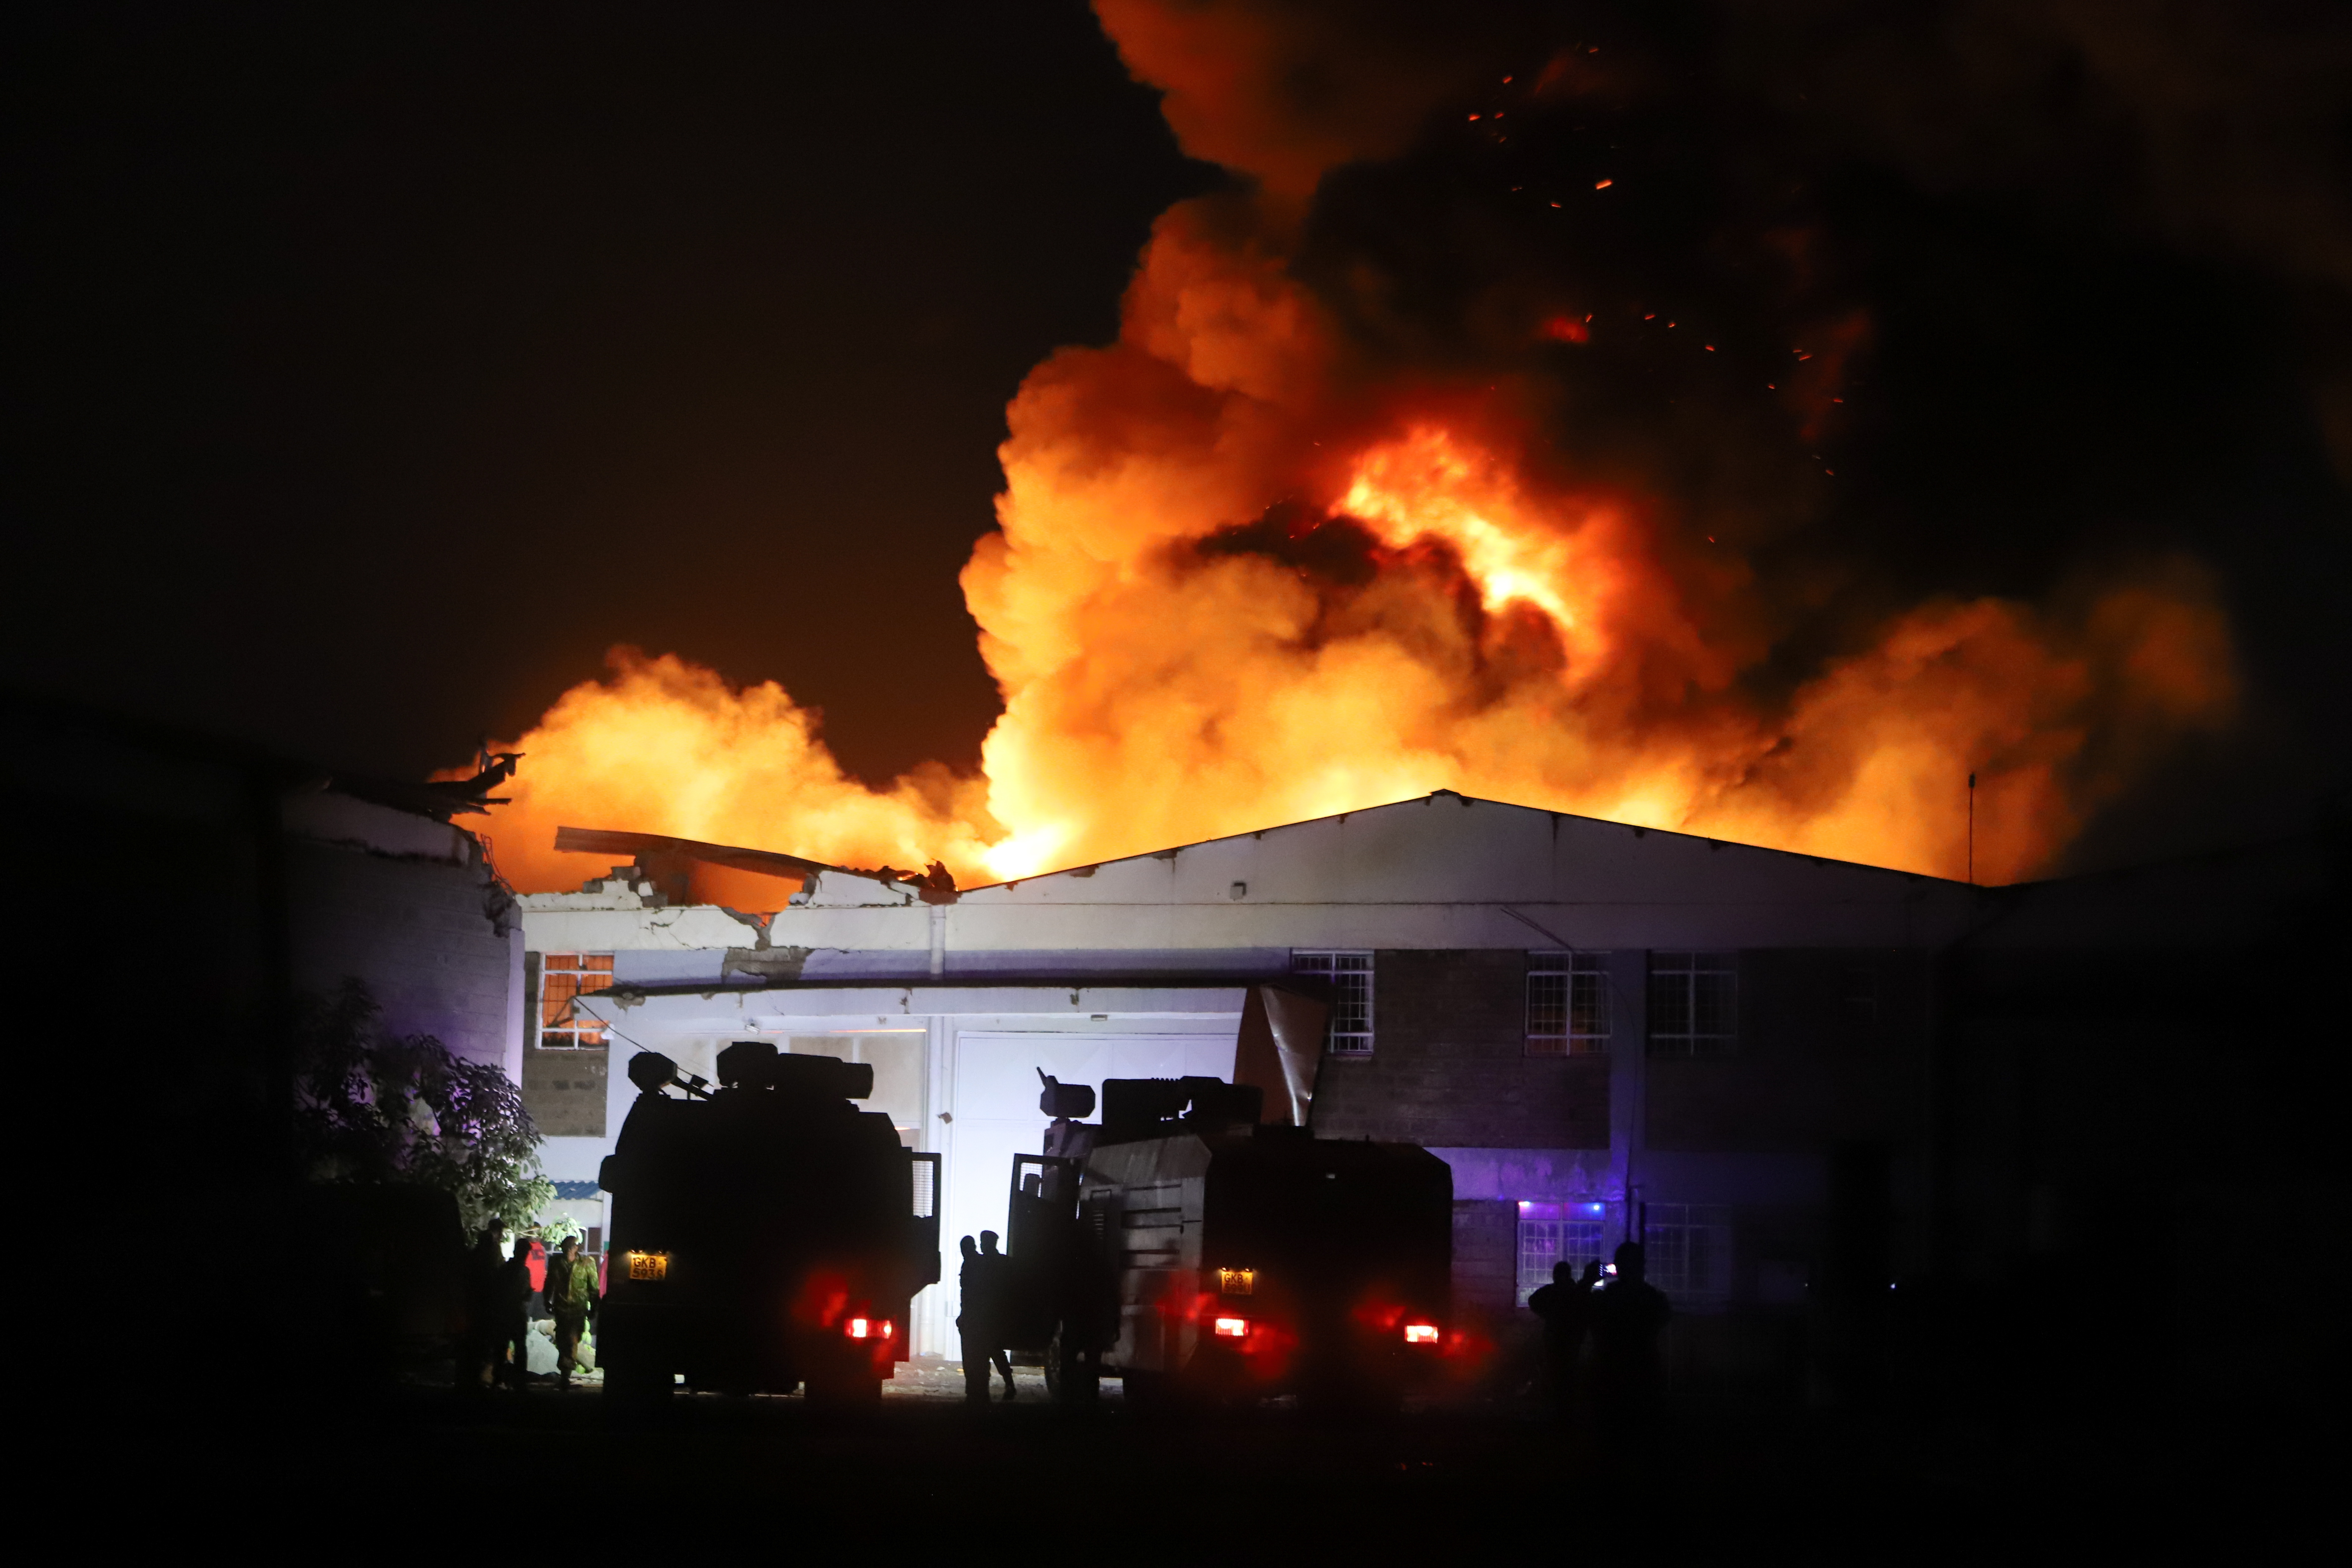 Firefighters watched the fire as it took over the sky late into the night